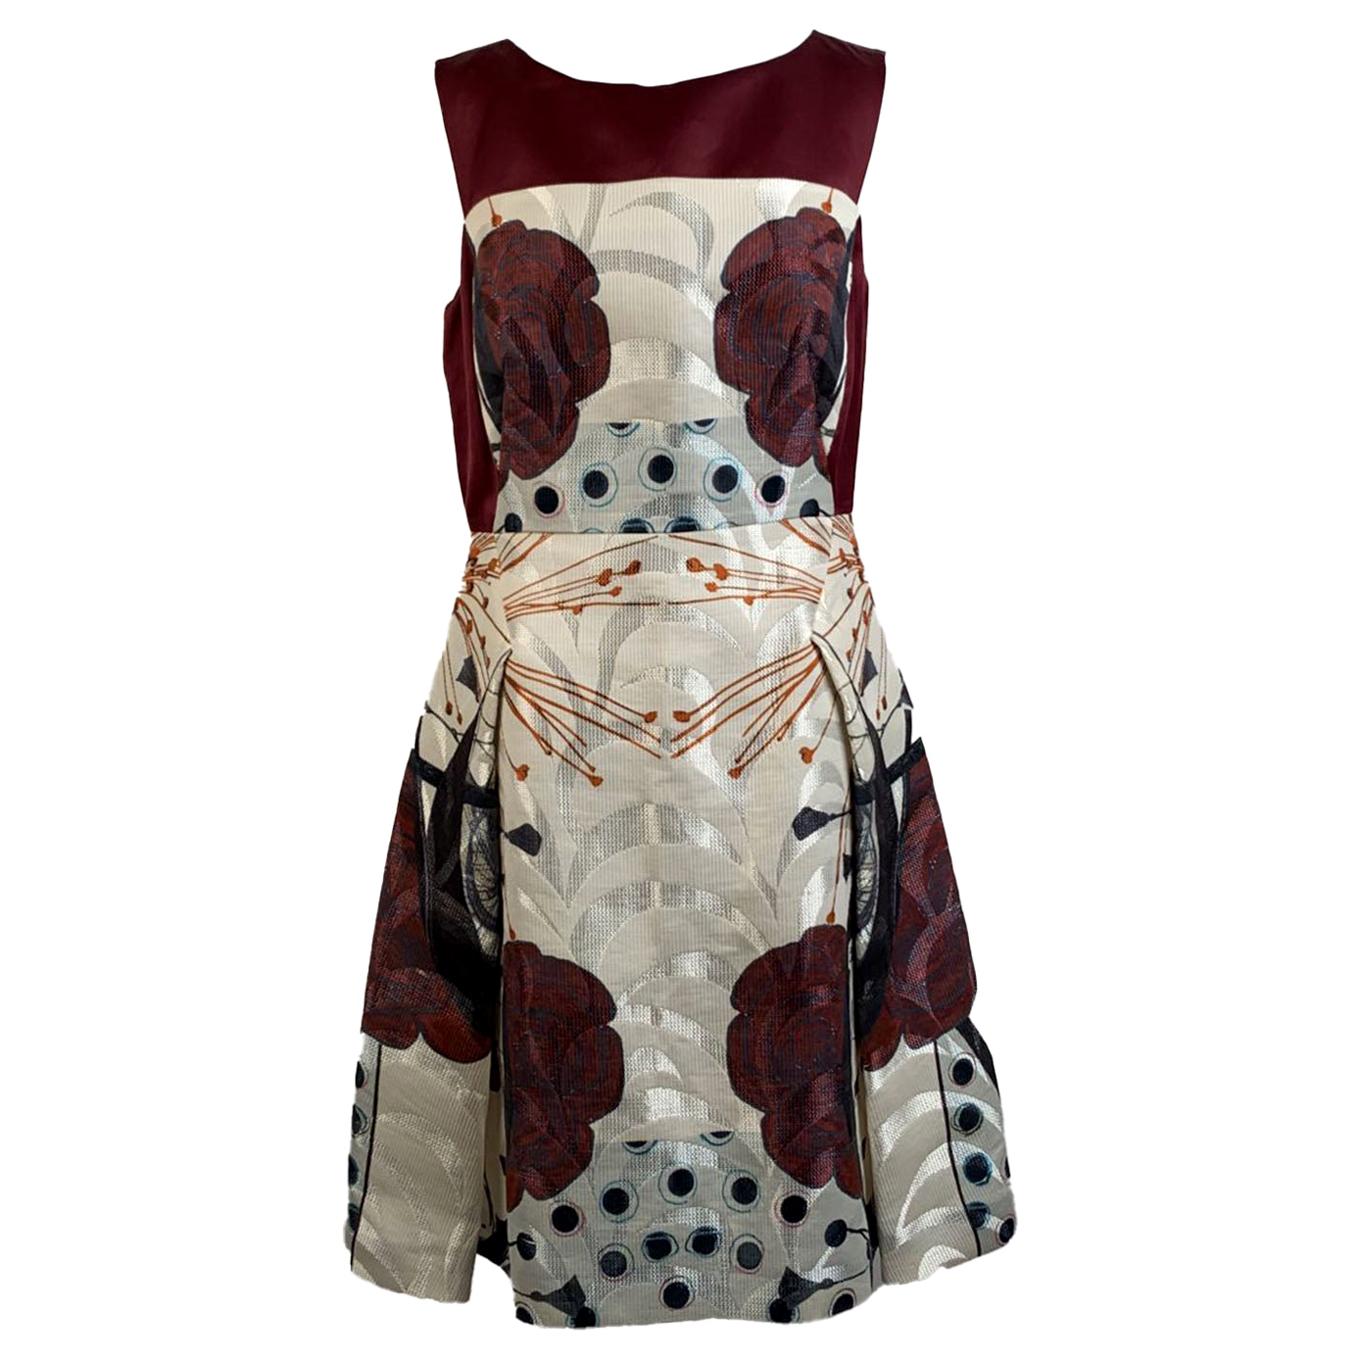 Antonio Marras sleeveless dress, with boat neckline and A-line skirt. Rear zip closure. Fully lined. Composition: 55% Cotton, 39% Viscose, 6% Silk. Size: 42 IT (The size shown for this item is the size indicated by the designer on the label) . It